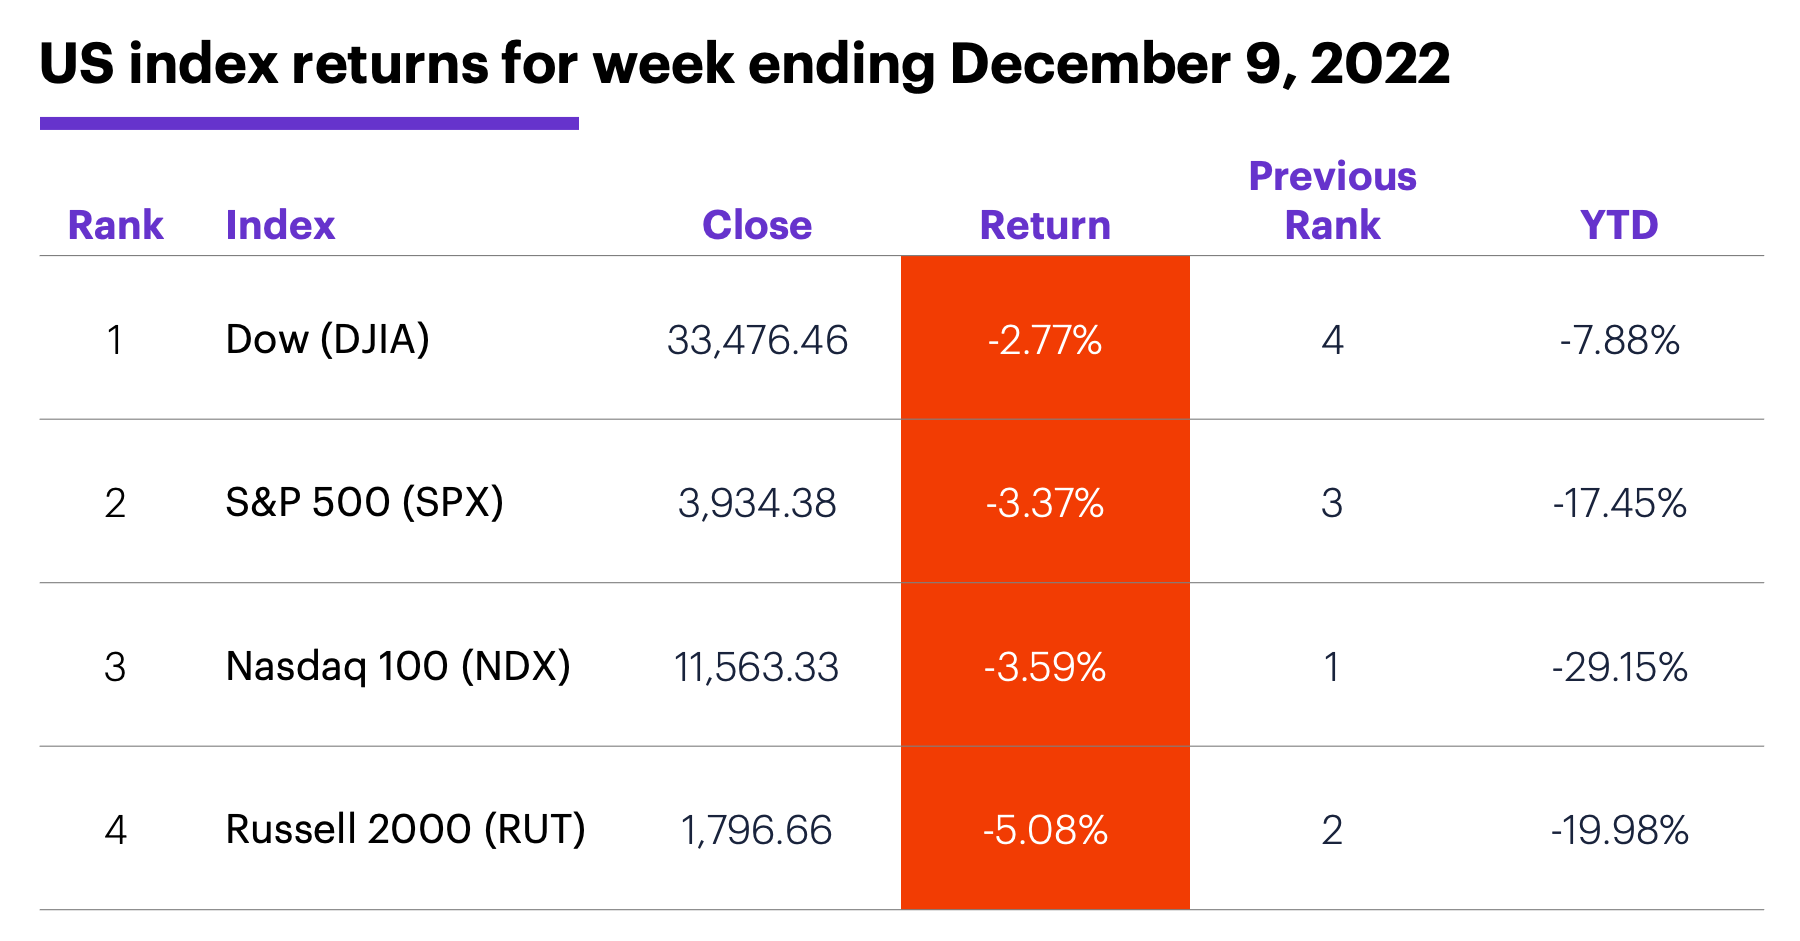 US stock index performance table for week ending 12/9/22. S&P 500 (SPX), Nasdaq 100 (NDX), Russell 2000 (RUT), Dow Jones Industrial Average (DJIA).